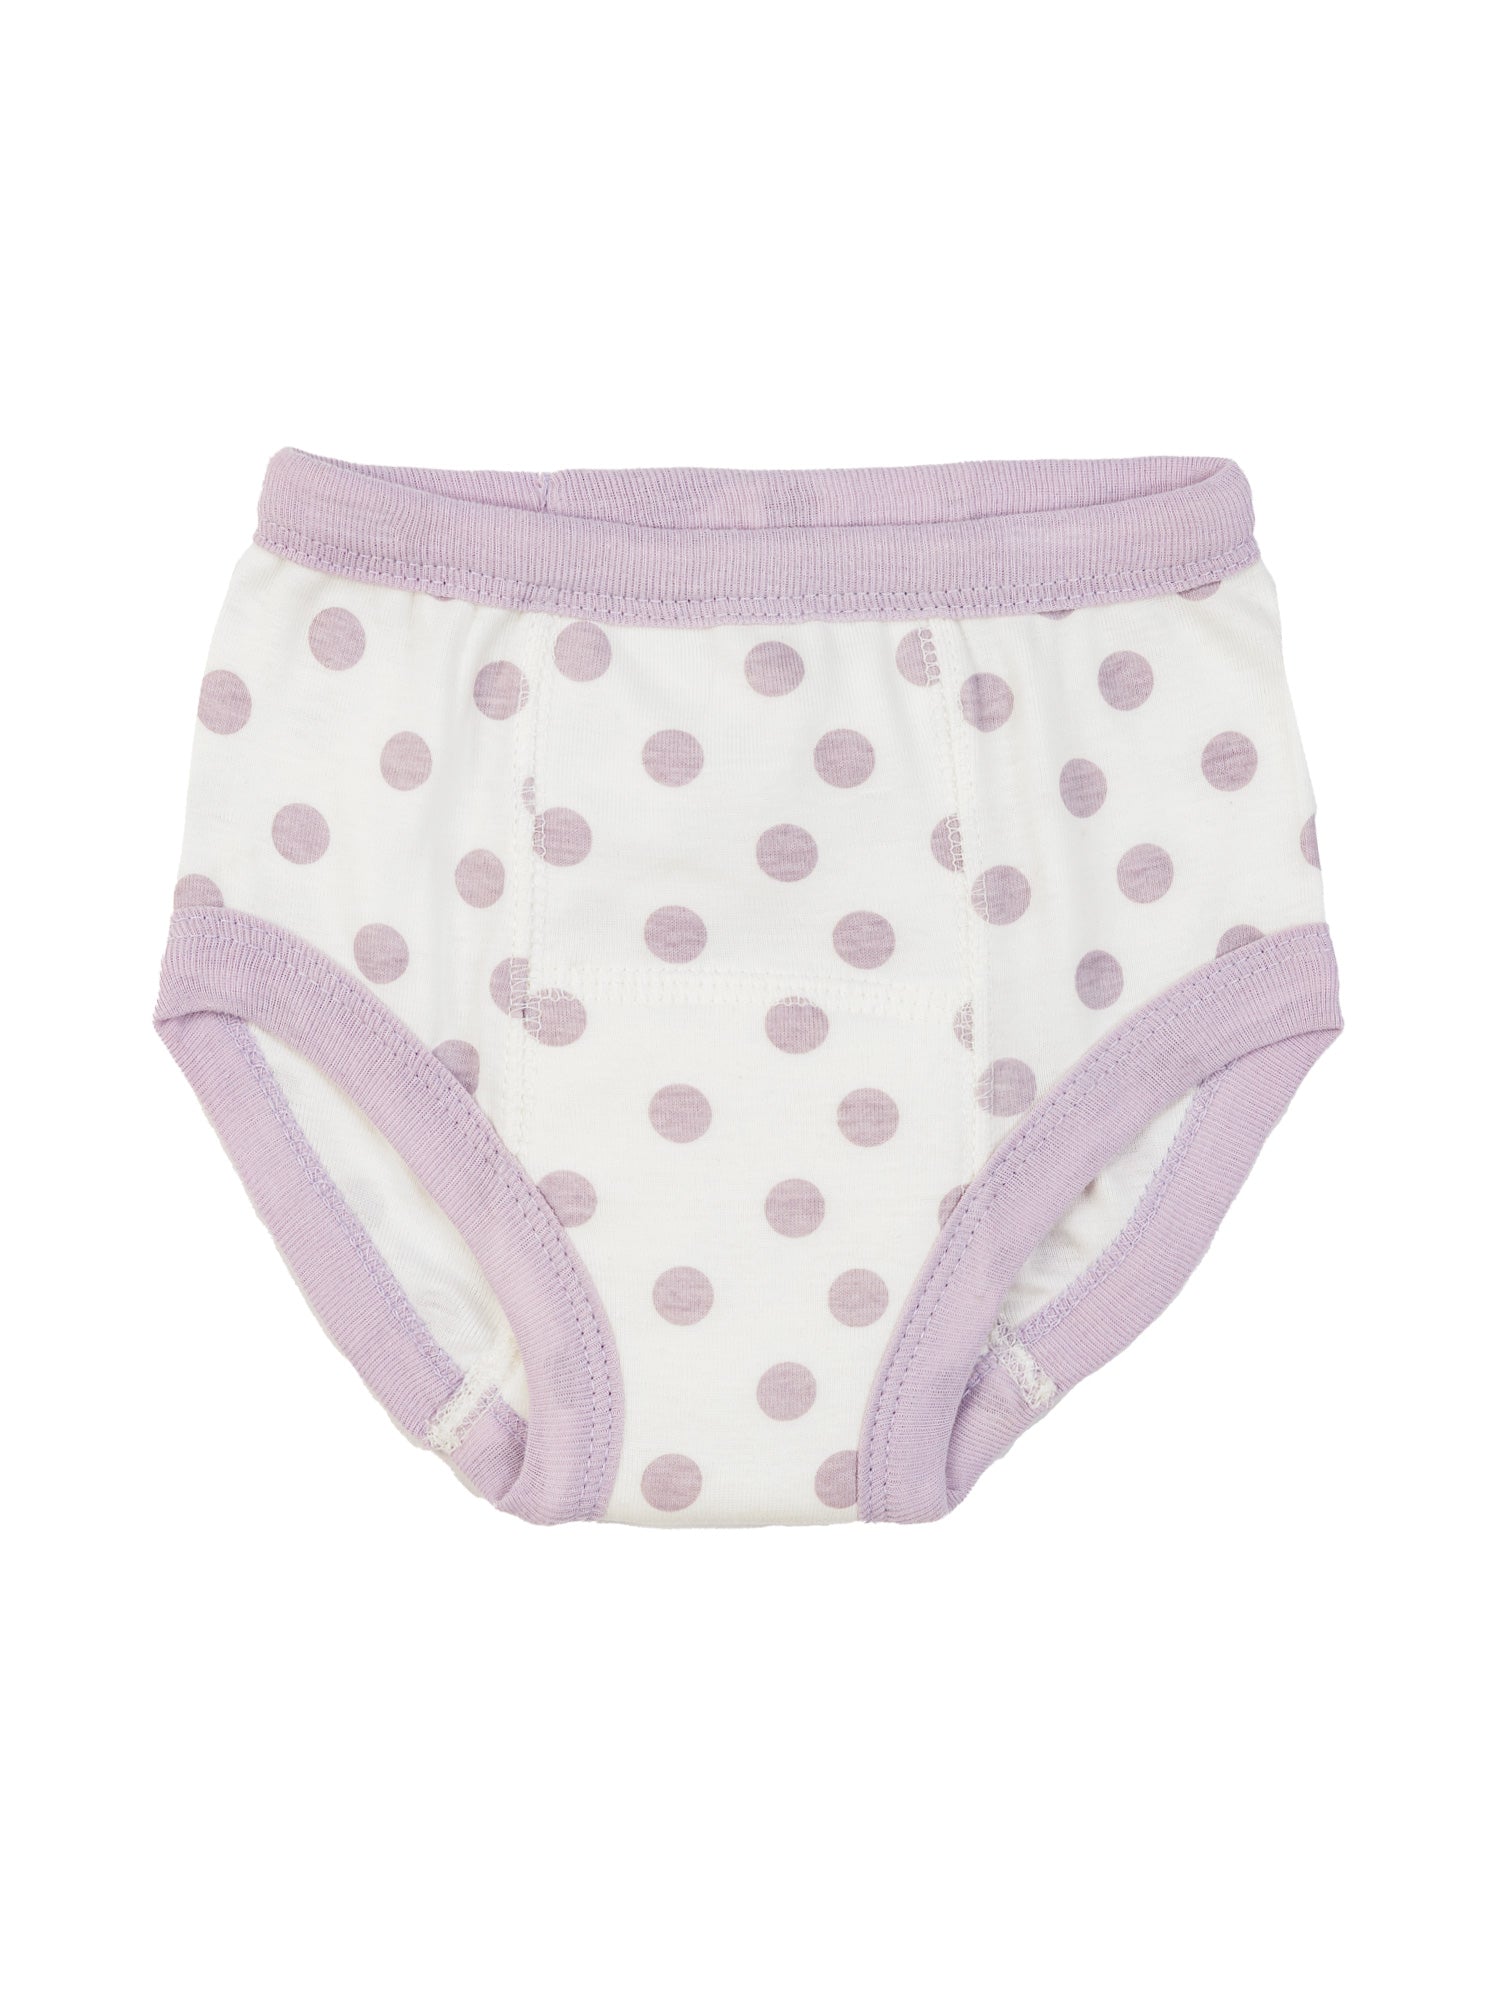 Polka Dot Training Underwear for Toddlers  Under the Nile